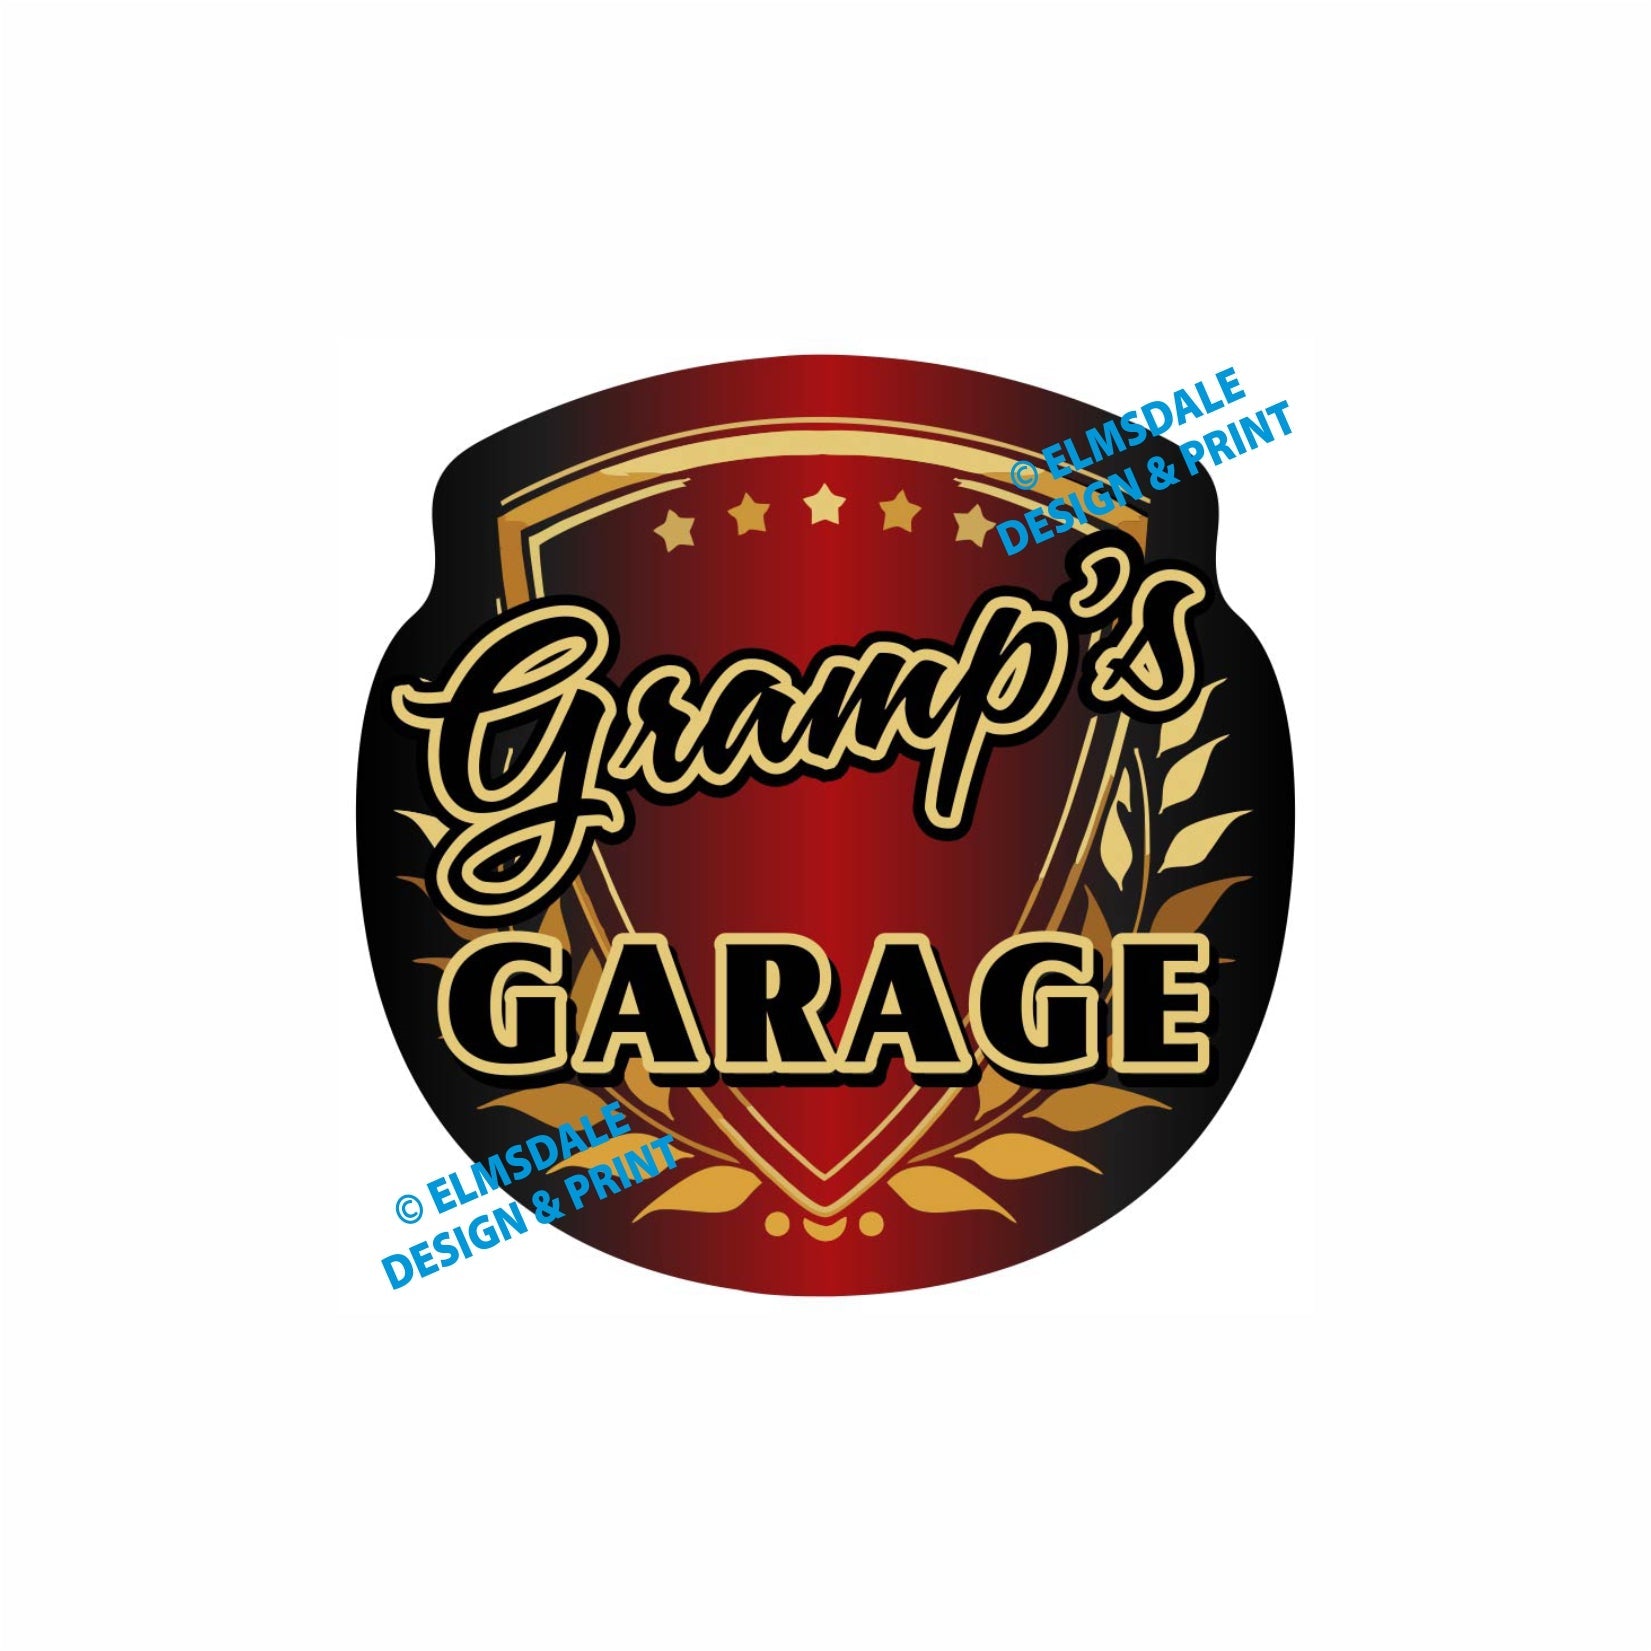 Gramps Garage - Decal / 7.75’ x 7.75’ / Gold & Red